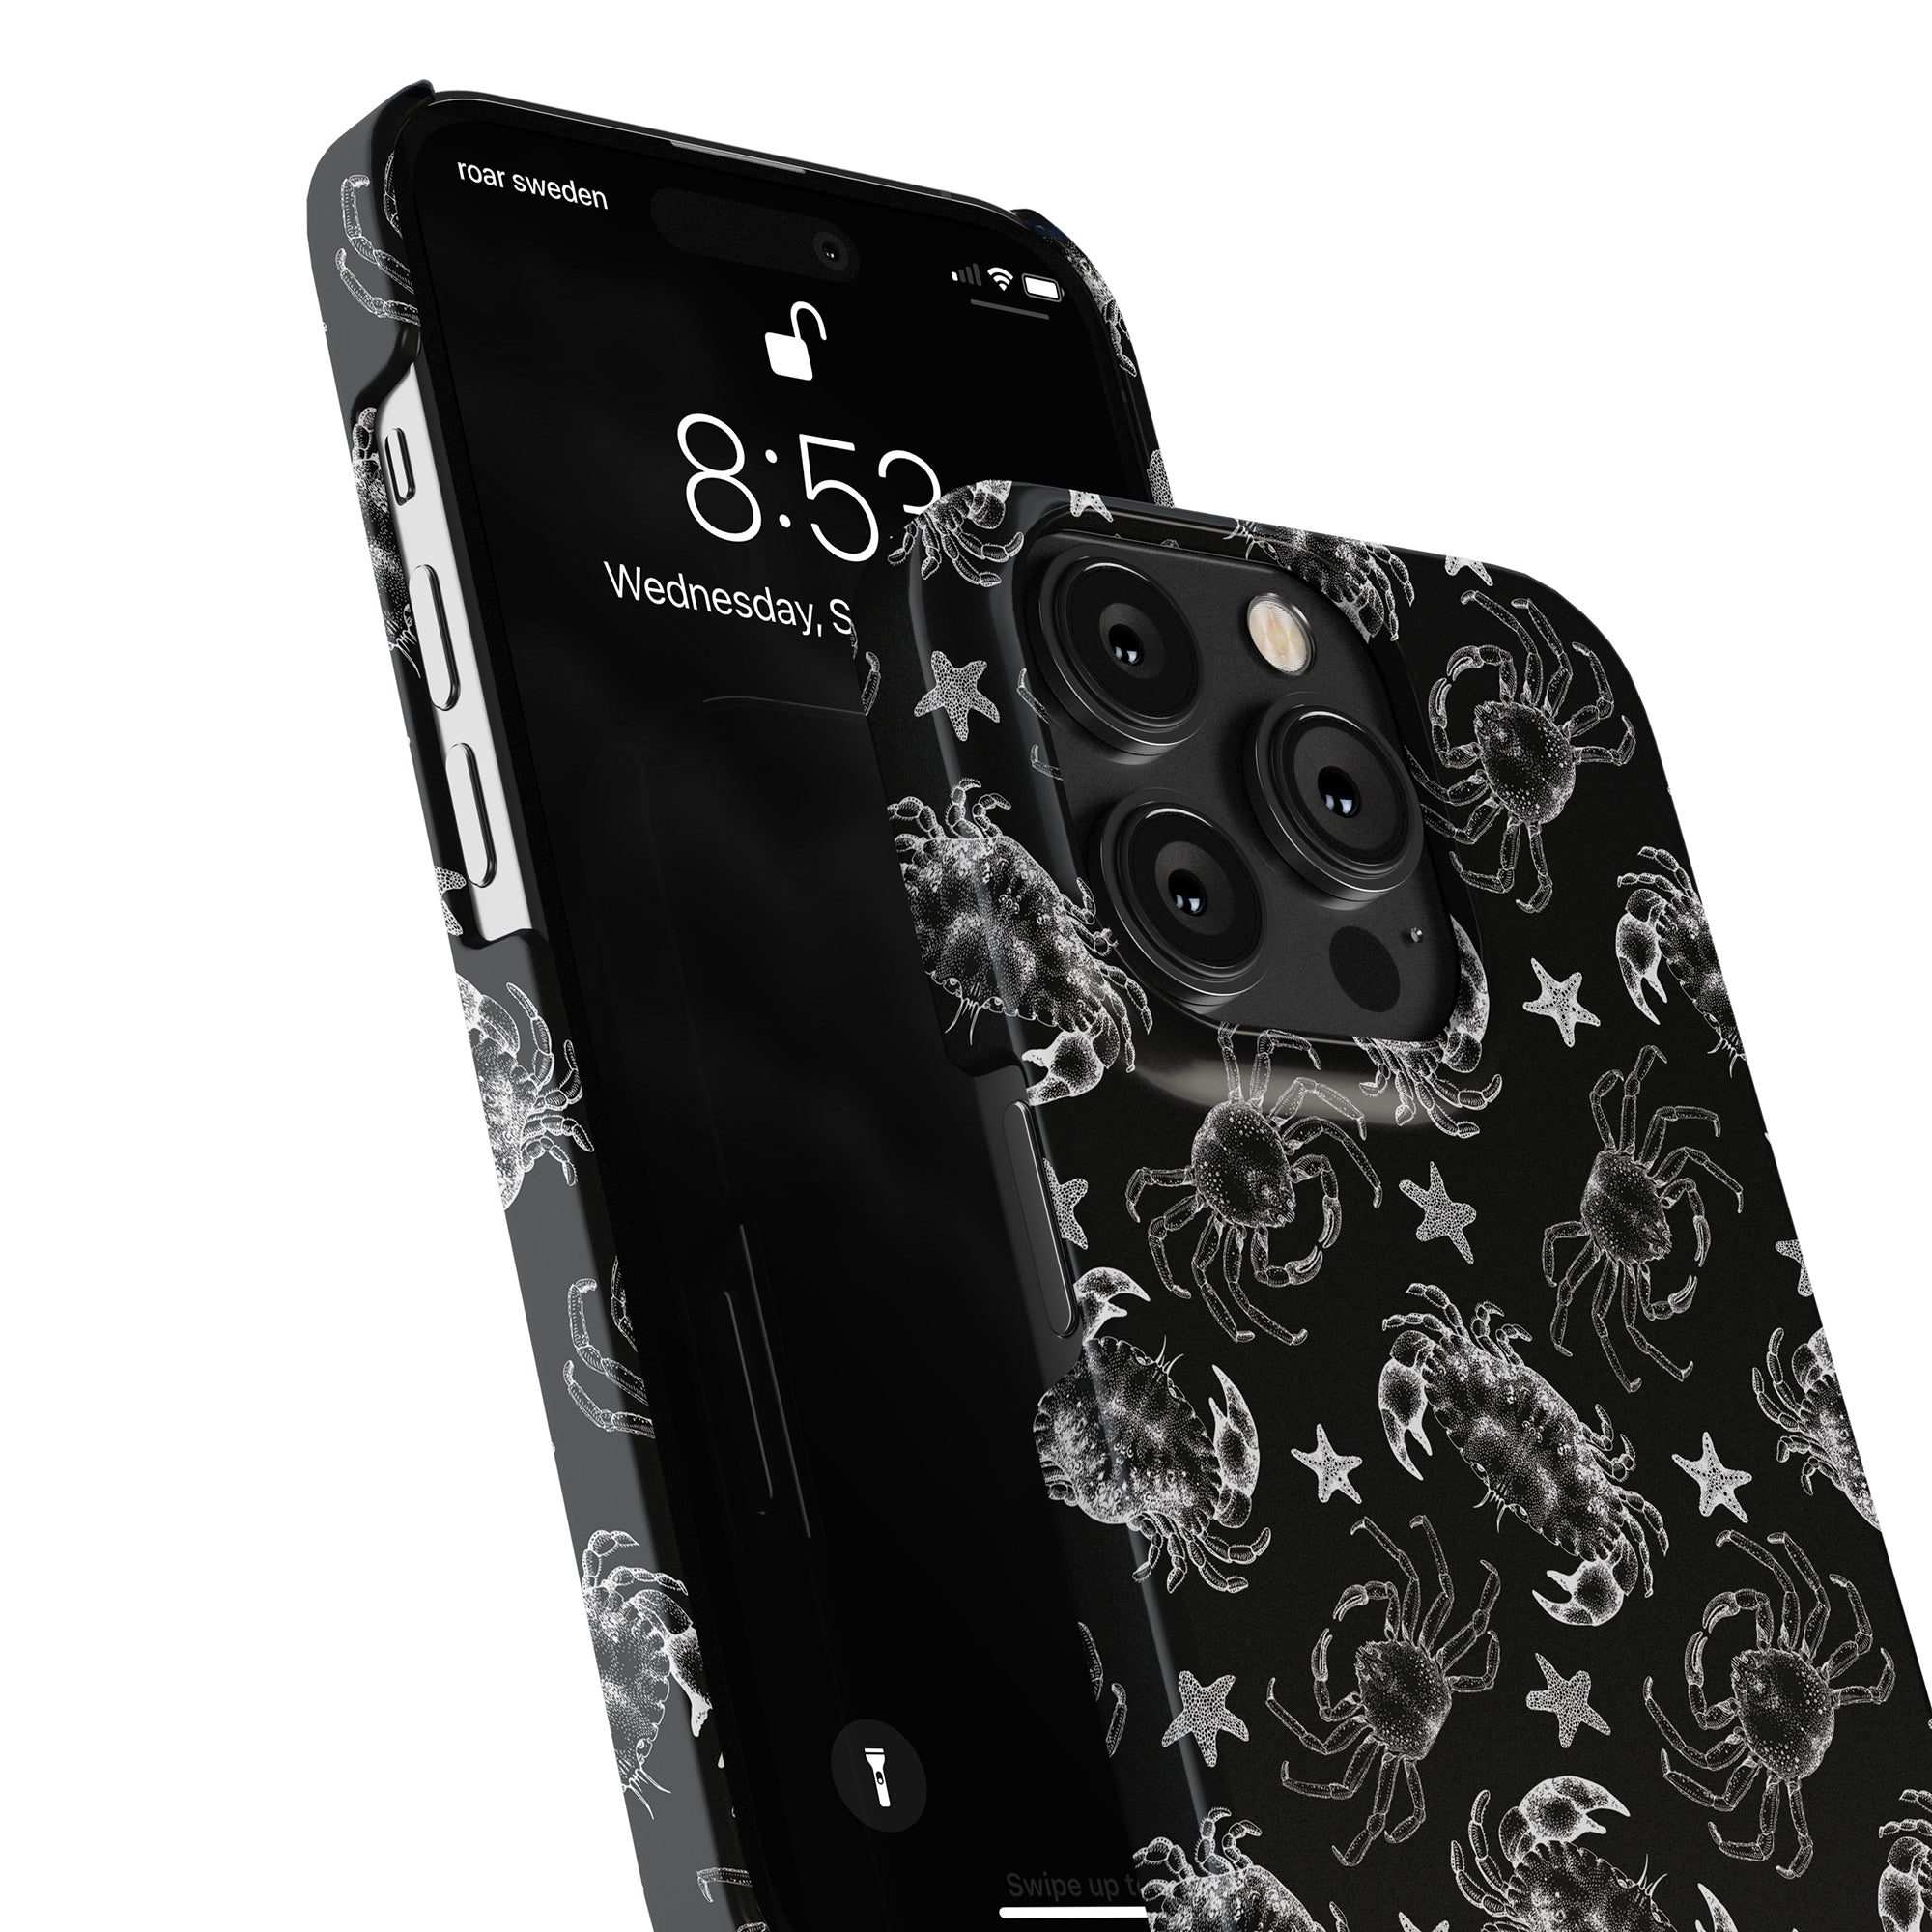 Close-up of a smartphone with a Black Crab - Slim Case from the Ocean Collection, featuring white sketches of crabs and stars. The screen shows the time 8:53 and date Wednesday, September 6.